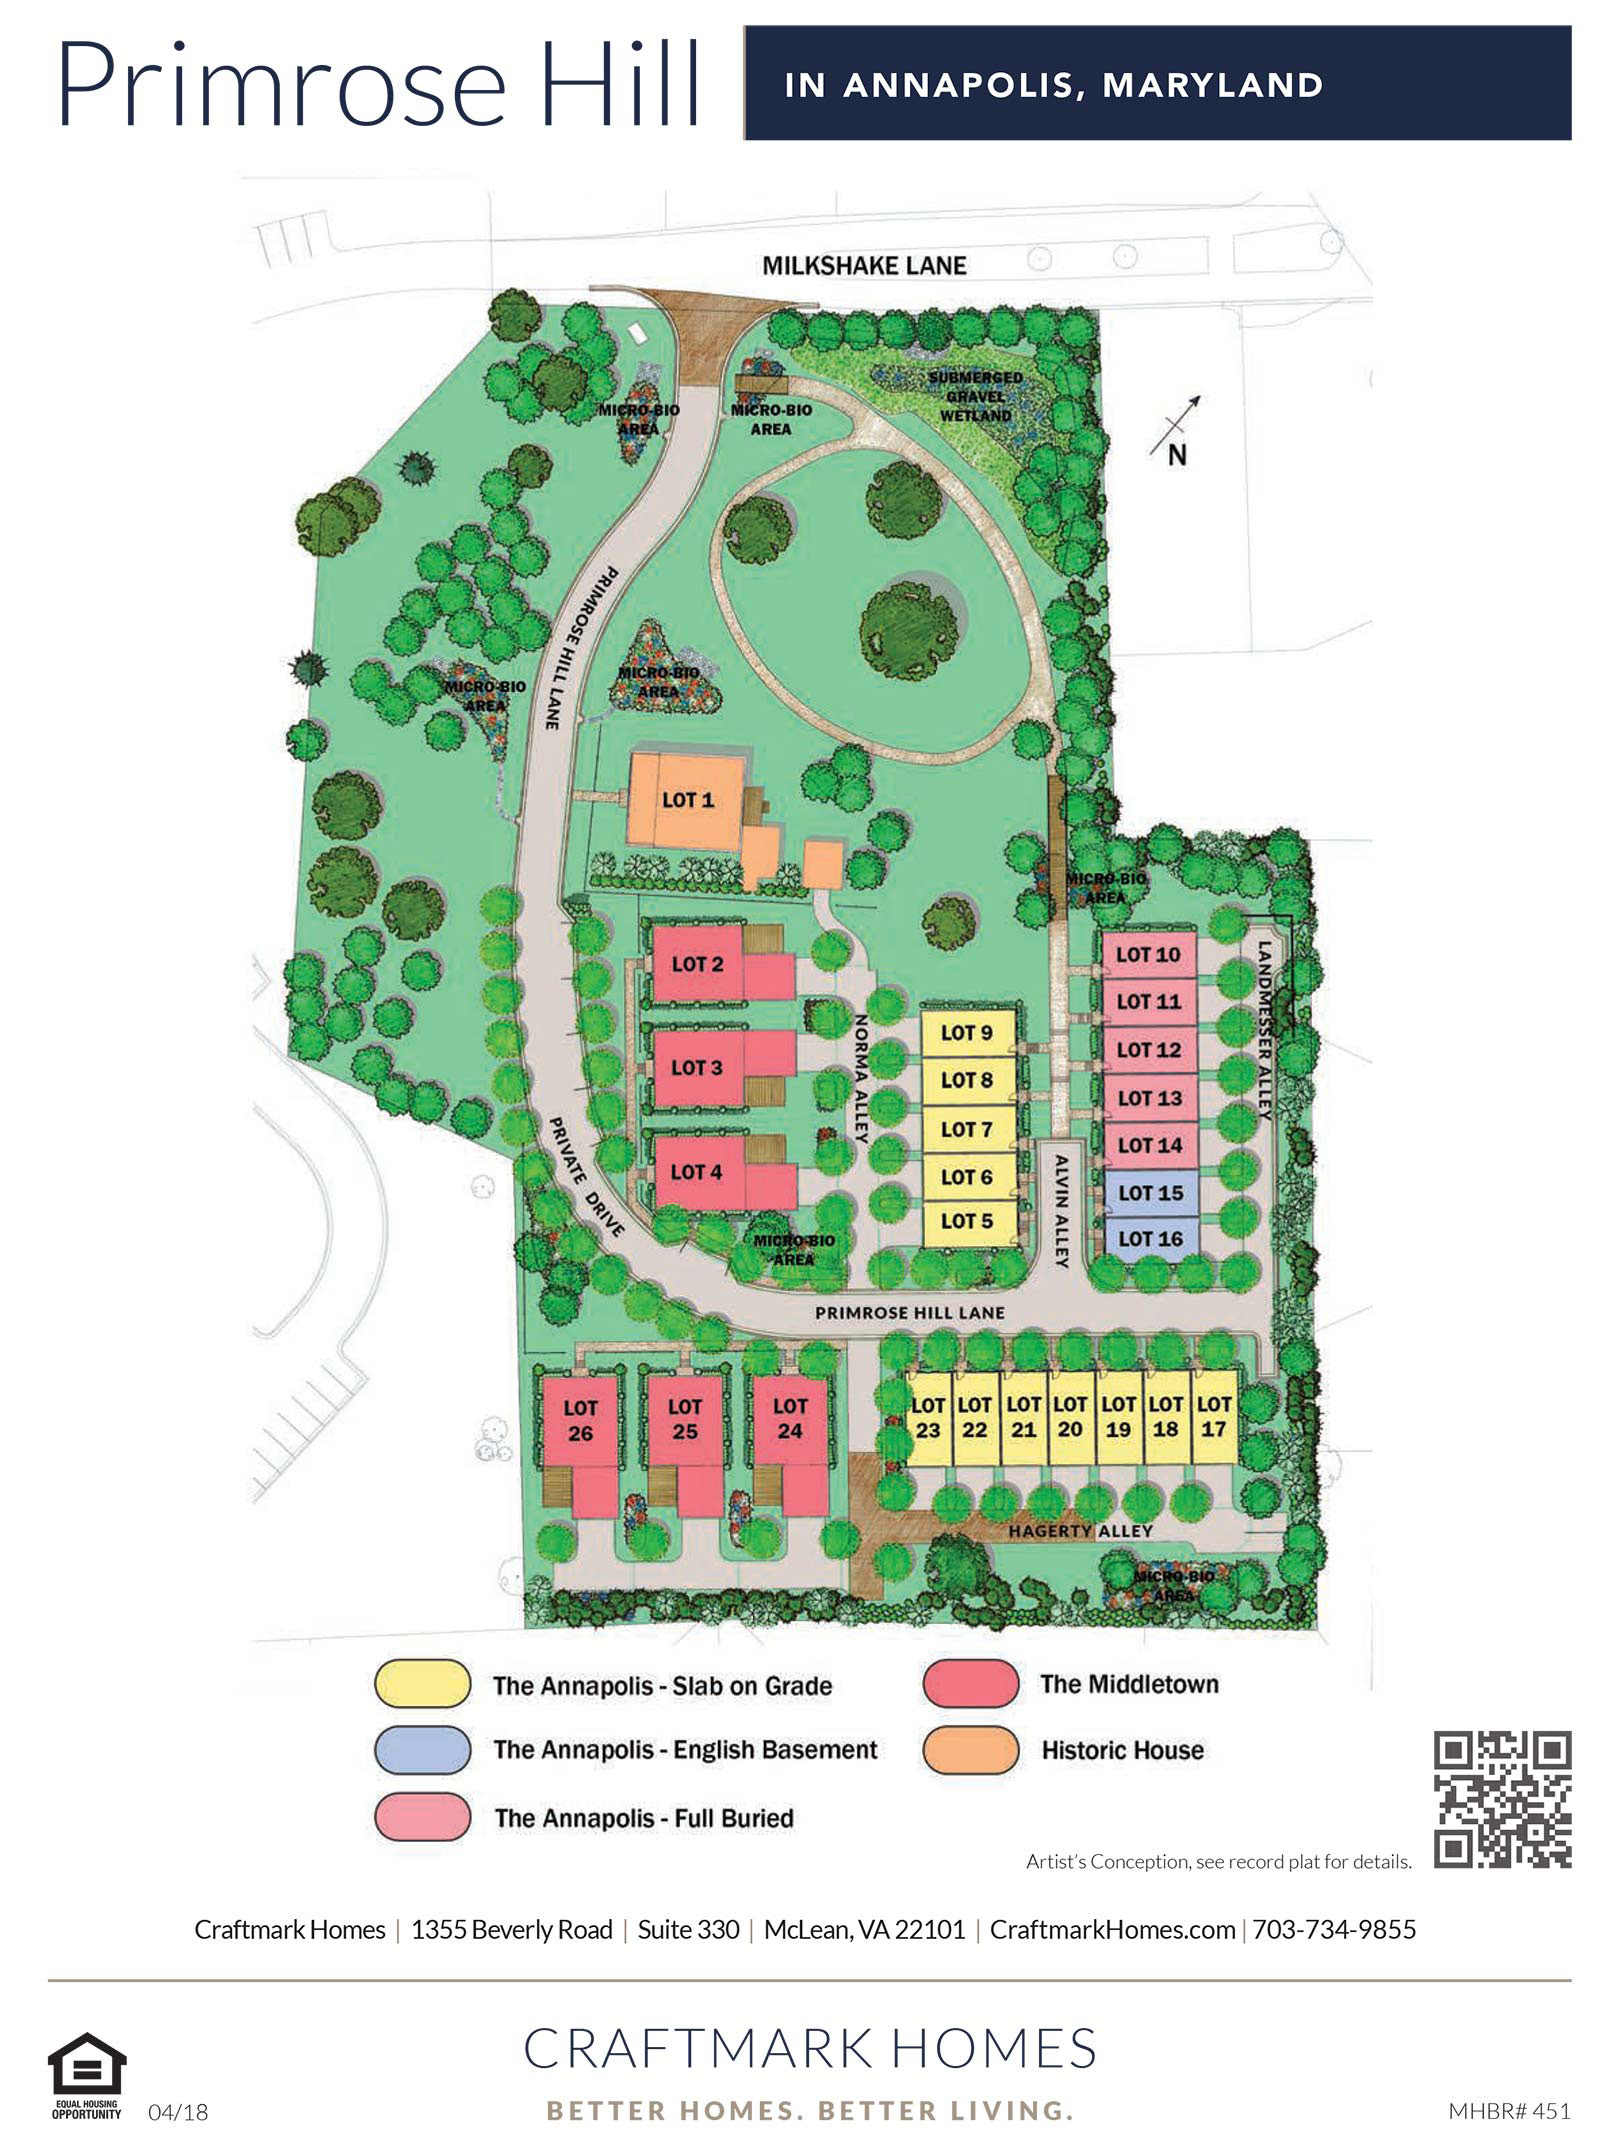 Primrose Hill Site Plan, Townhomes in Annapolis MD, Craftmark Homes